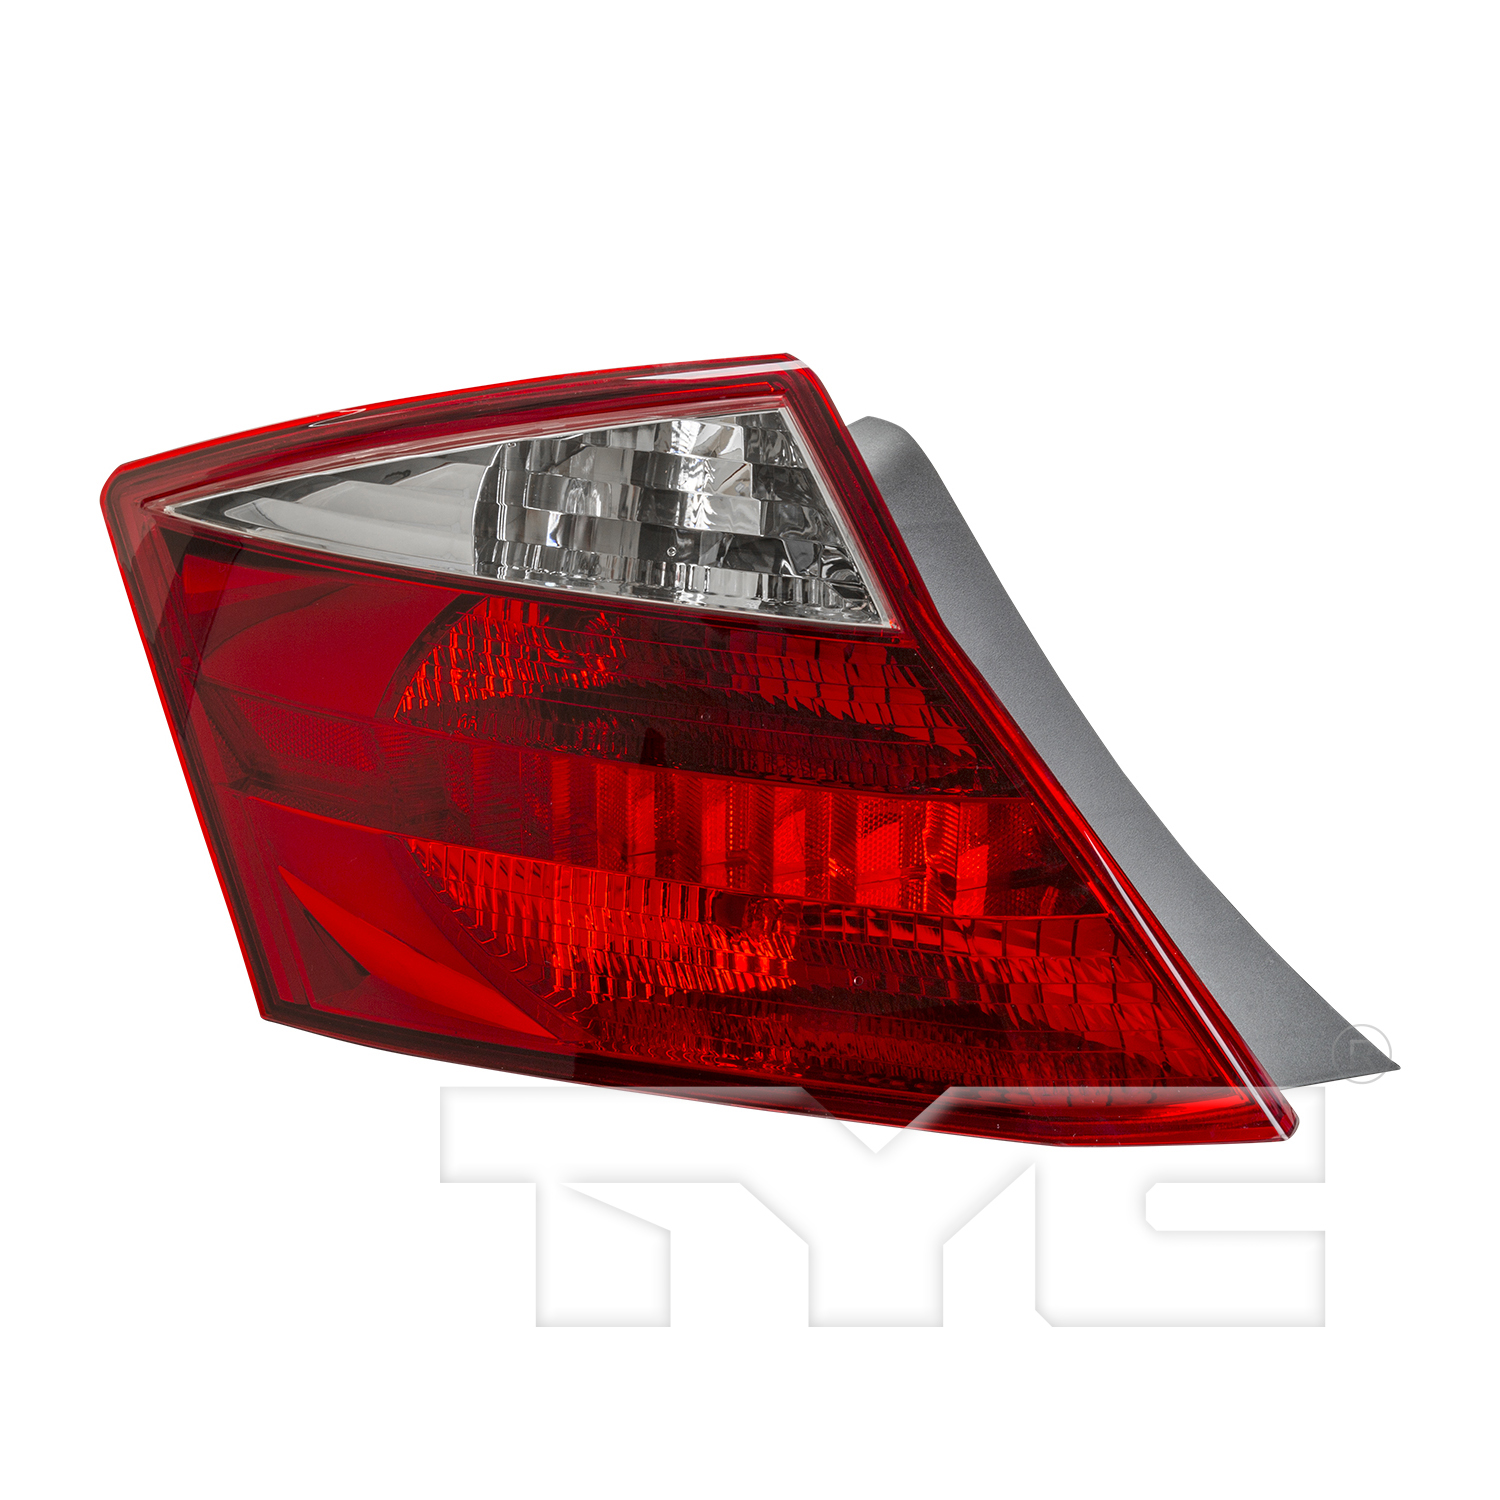 Aftermarket TAILLIGHTS for HONDA - ACCORD, ACCORD,08-10,LT Taillamp assy